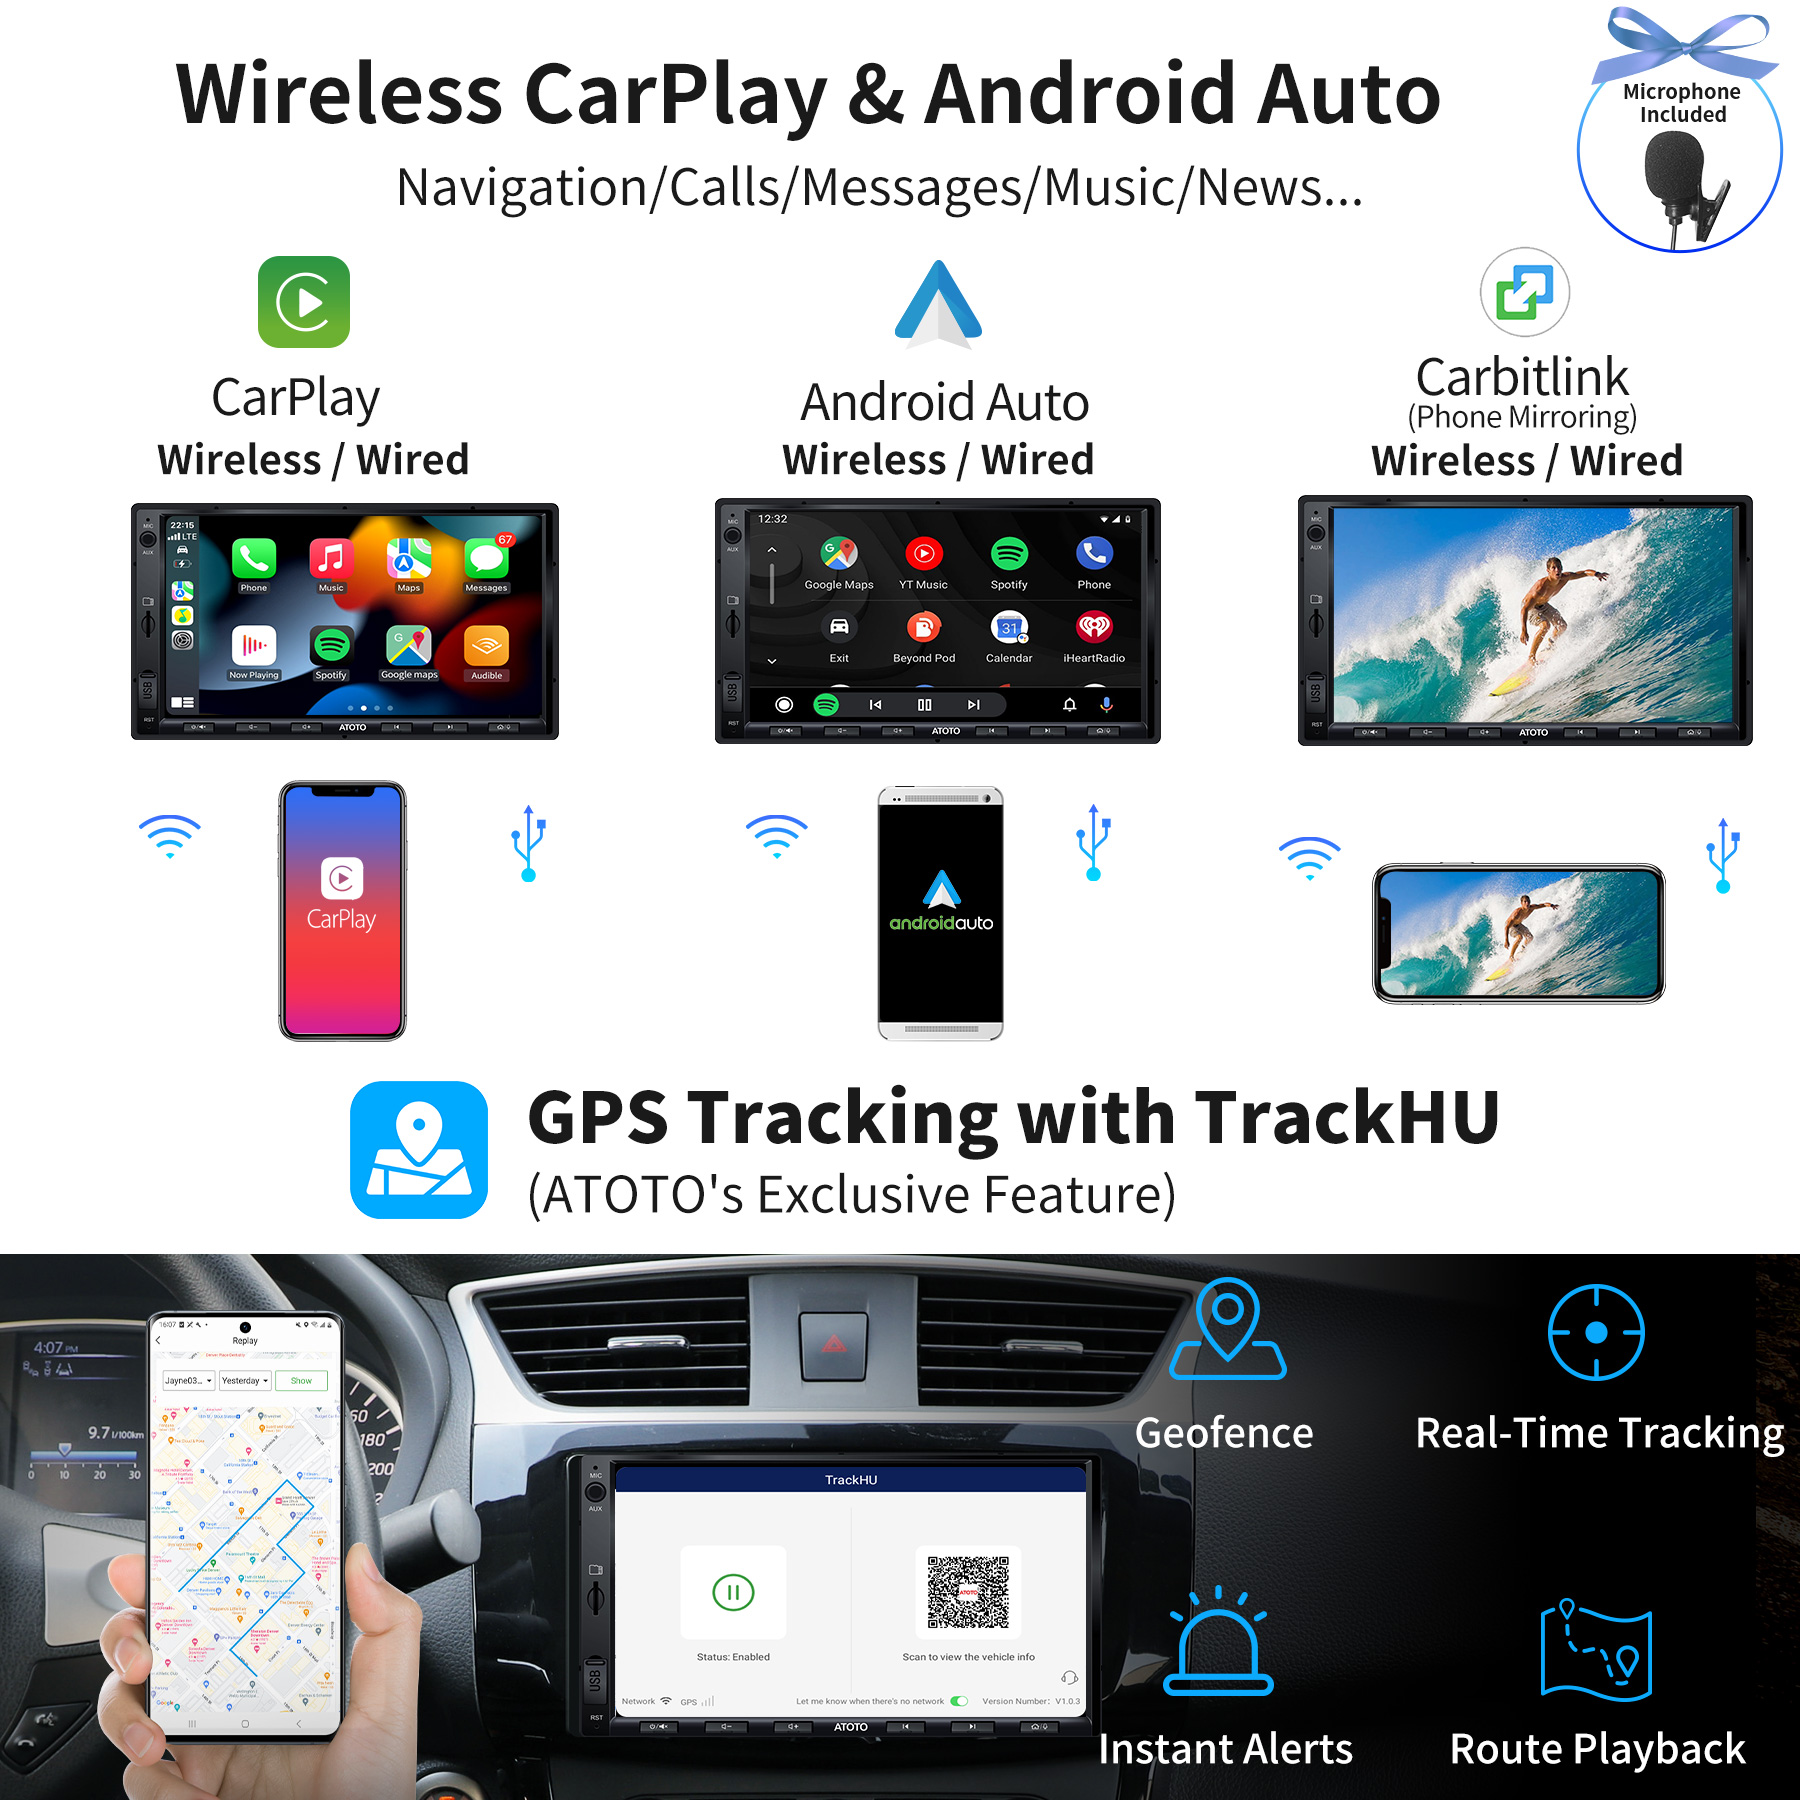 ATOTO S8 Premium Gen2 10.1 2 DIN Android Car Stereo w/ CarPlay/Android  Auto/2BT